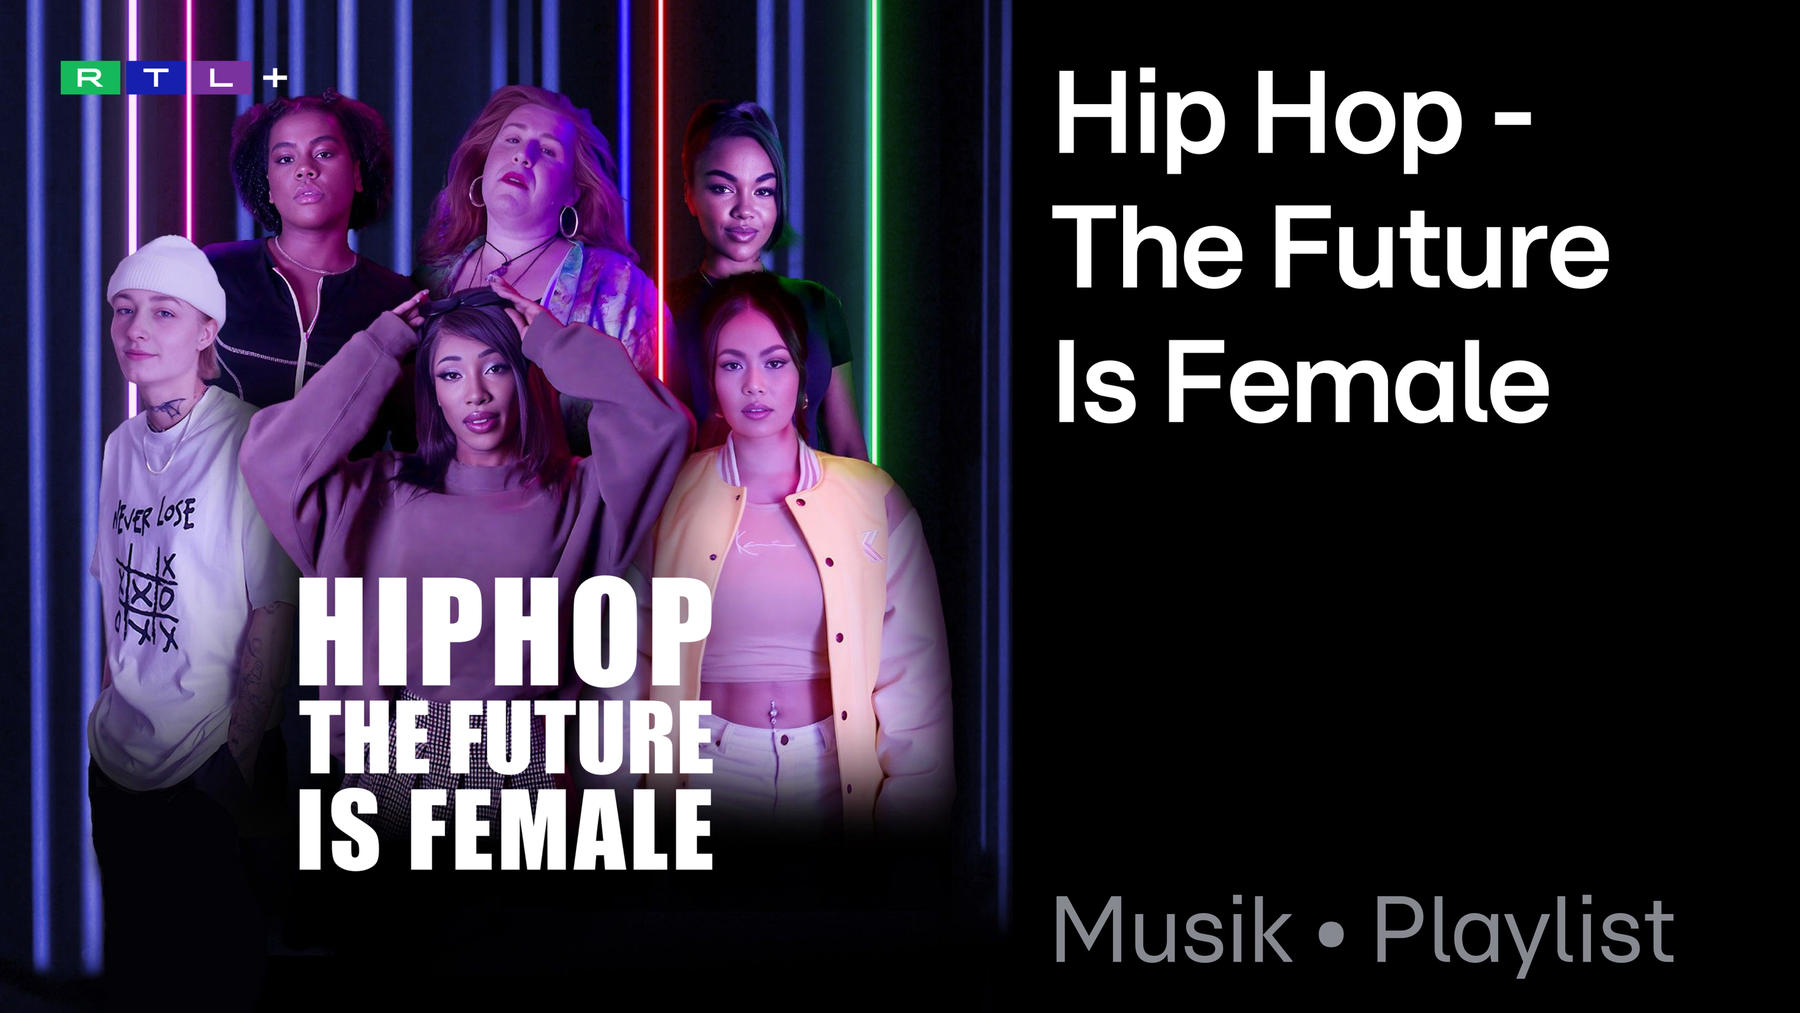 Playlist: Hip Hop the future is female